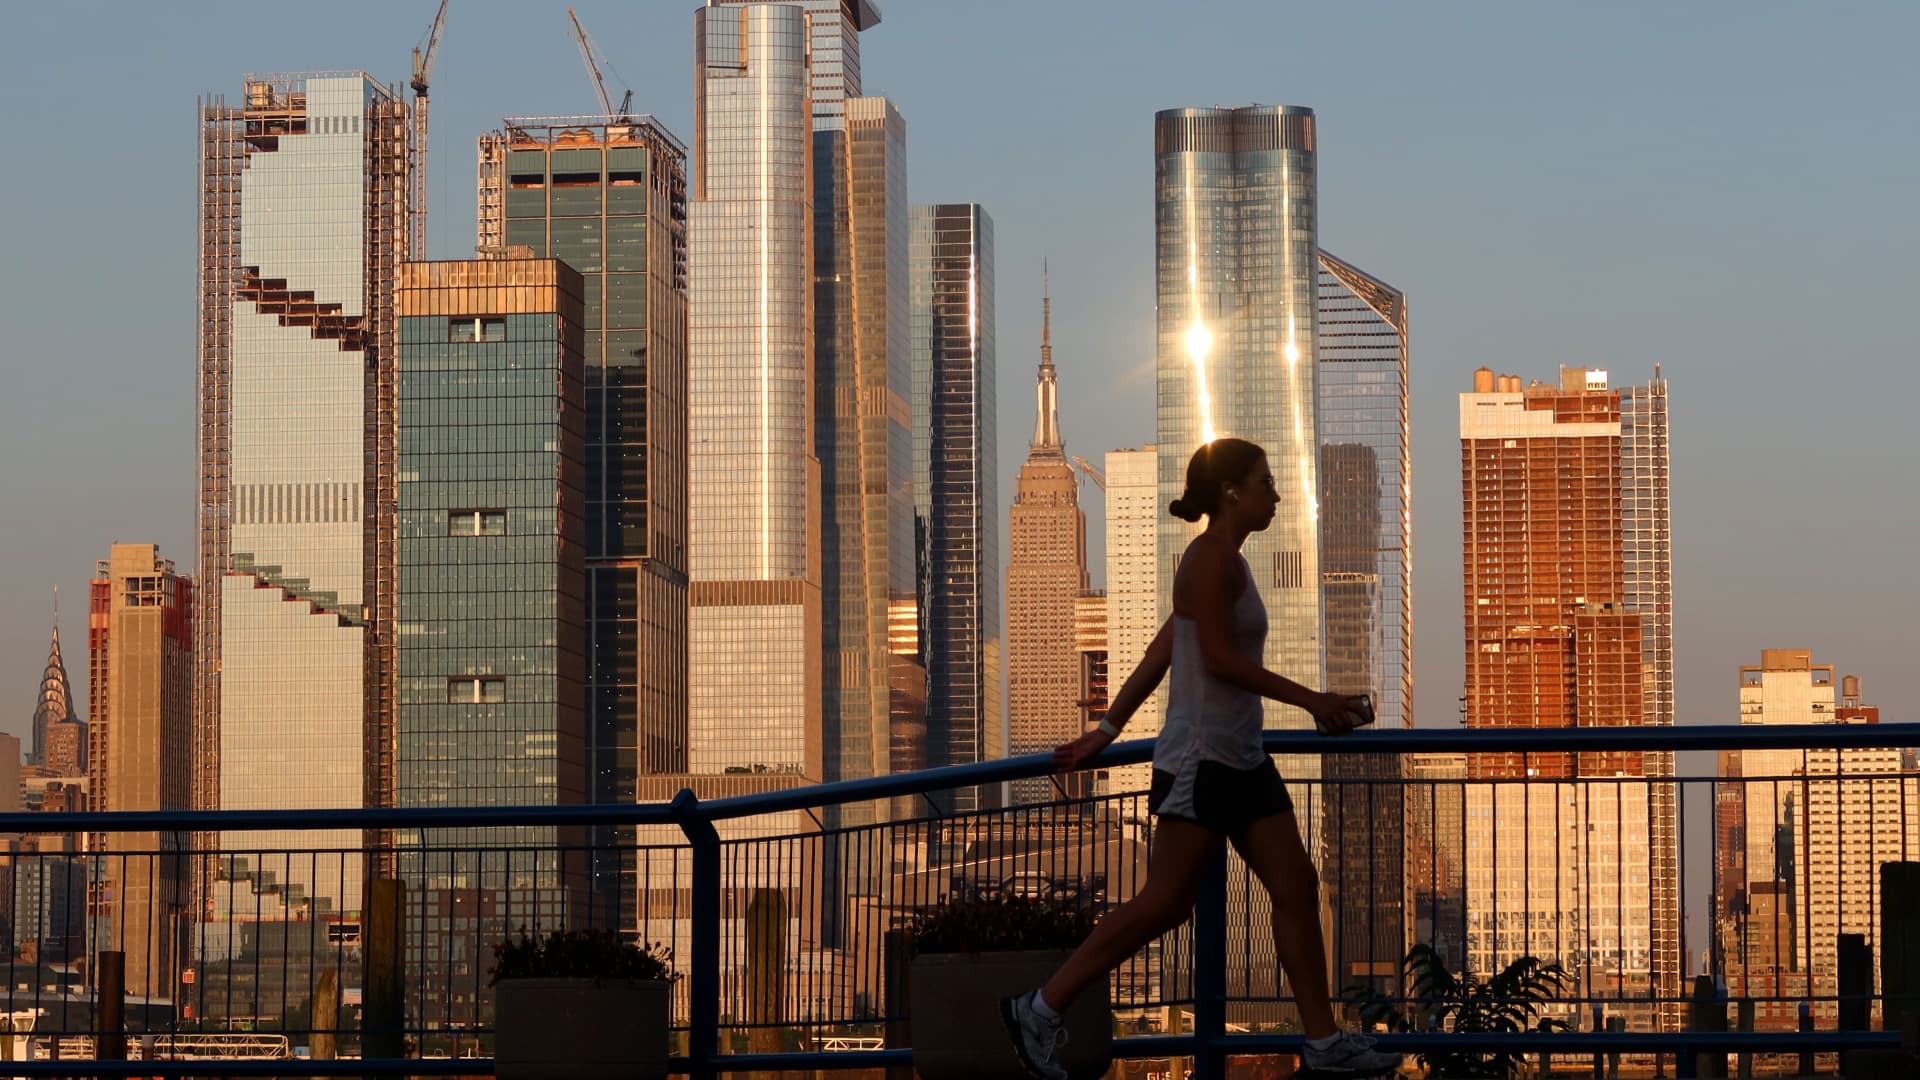 A woman walks past Hudson Yards and the Empire State Building as the sun sets in New York City on June 29, 2021 as seen from Weehawken, New Jersey.